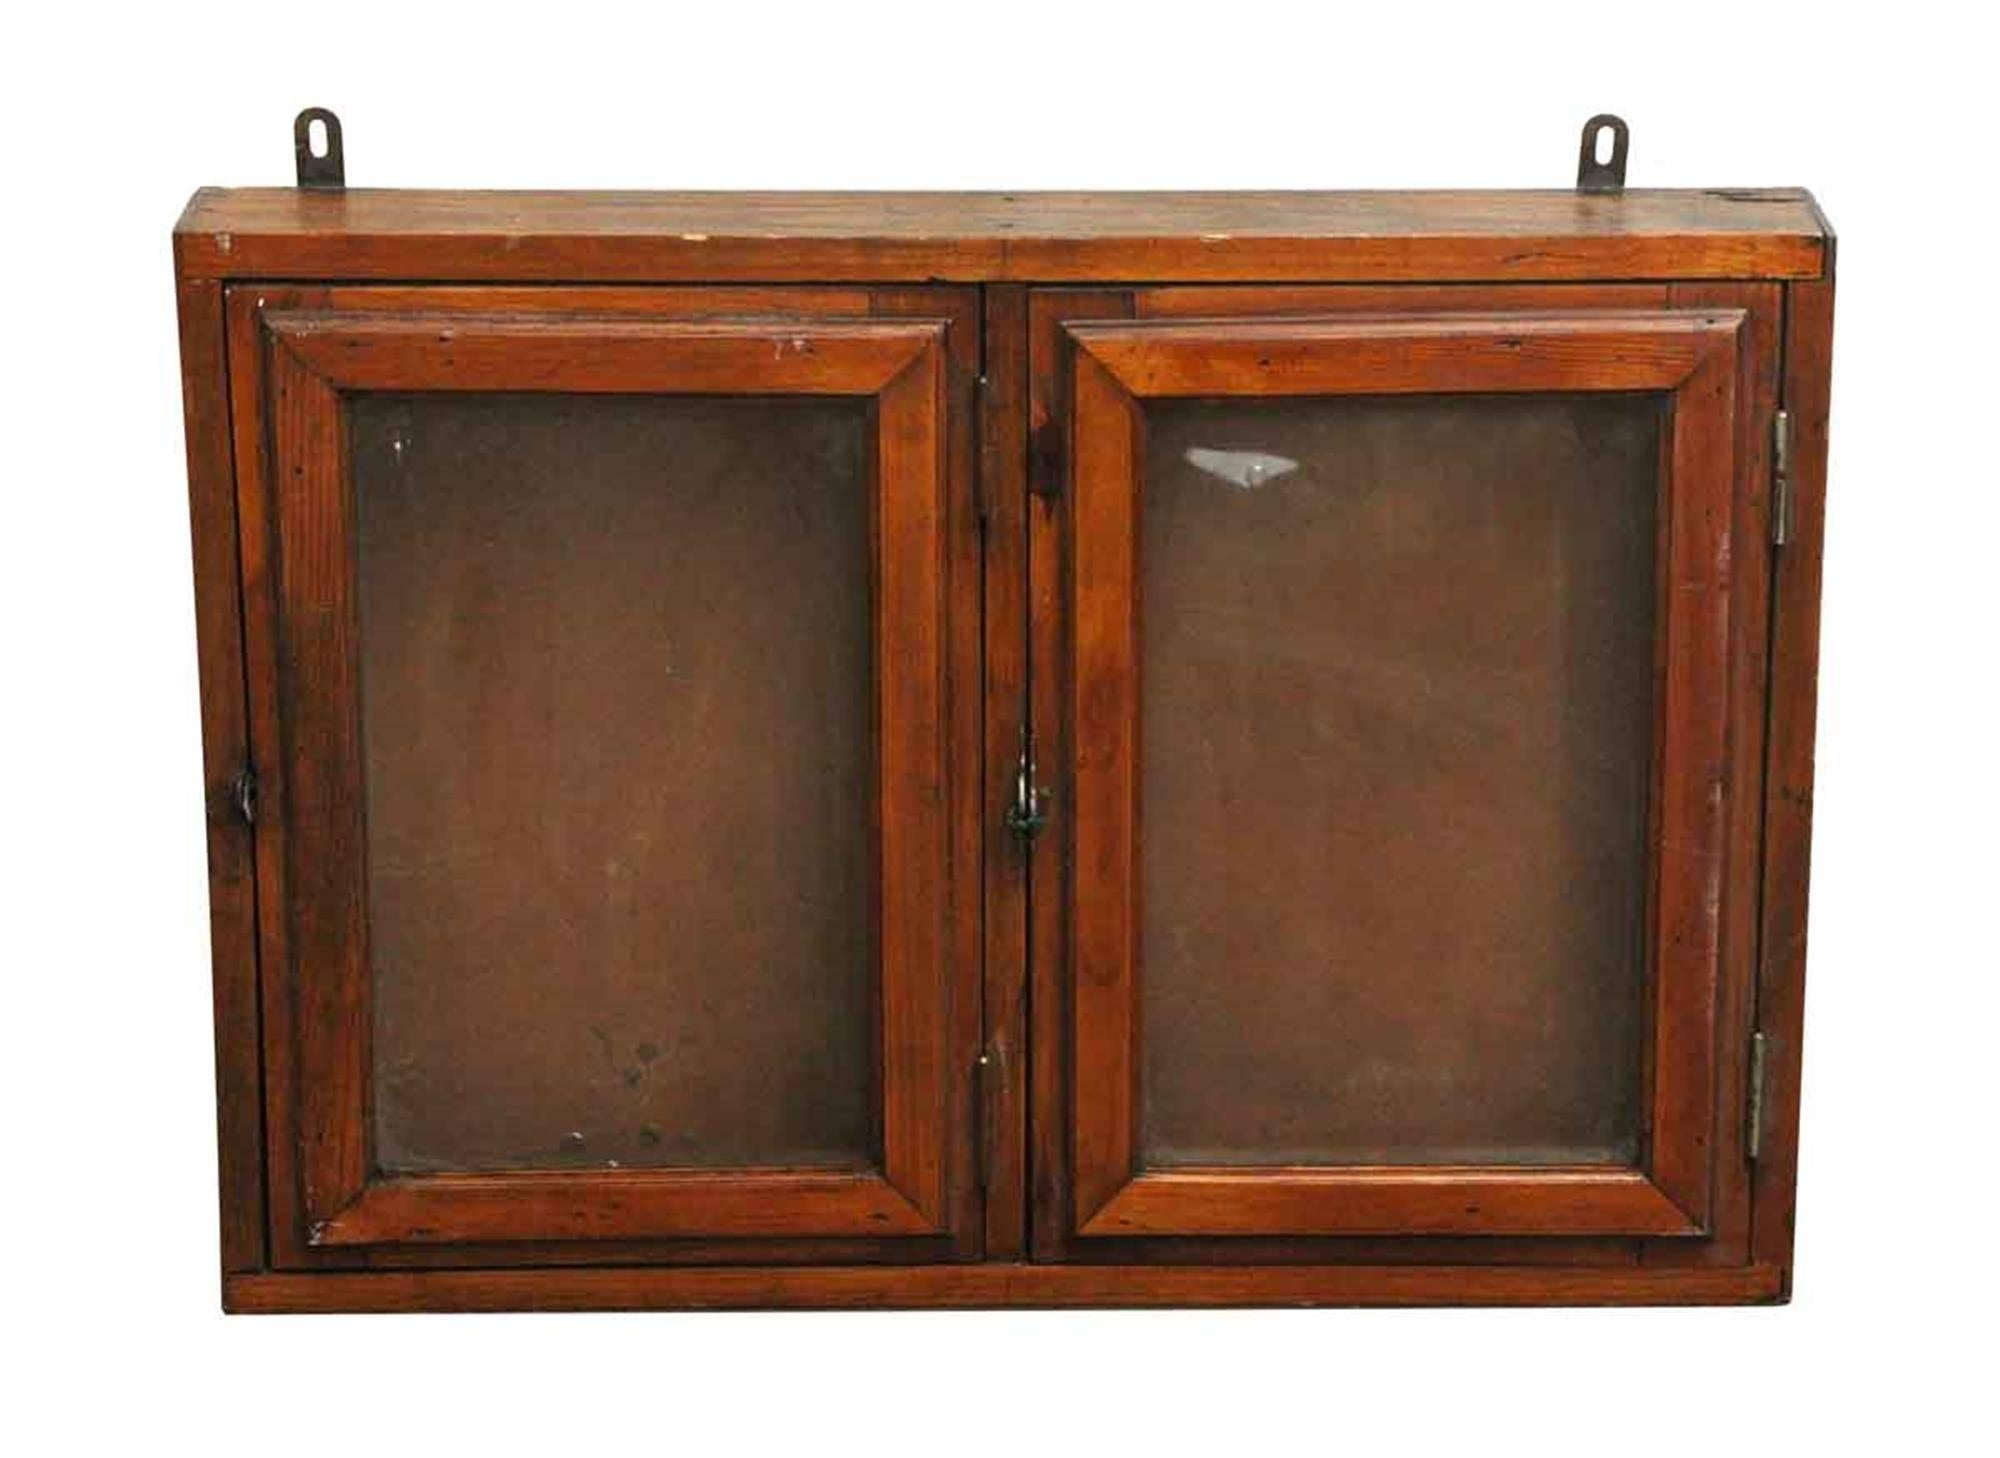 1940s French two-door oak and glass display case with a nice patina on the wood. This can be seen at our 302 Bowery location in Manhattan.